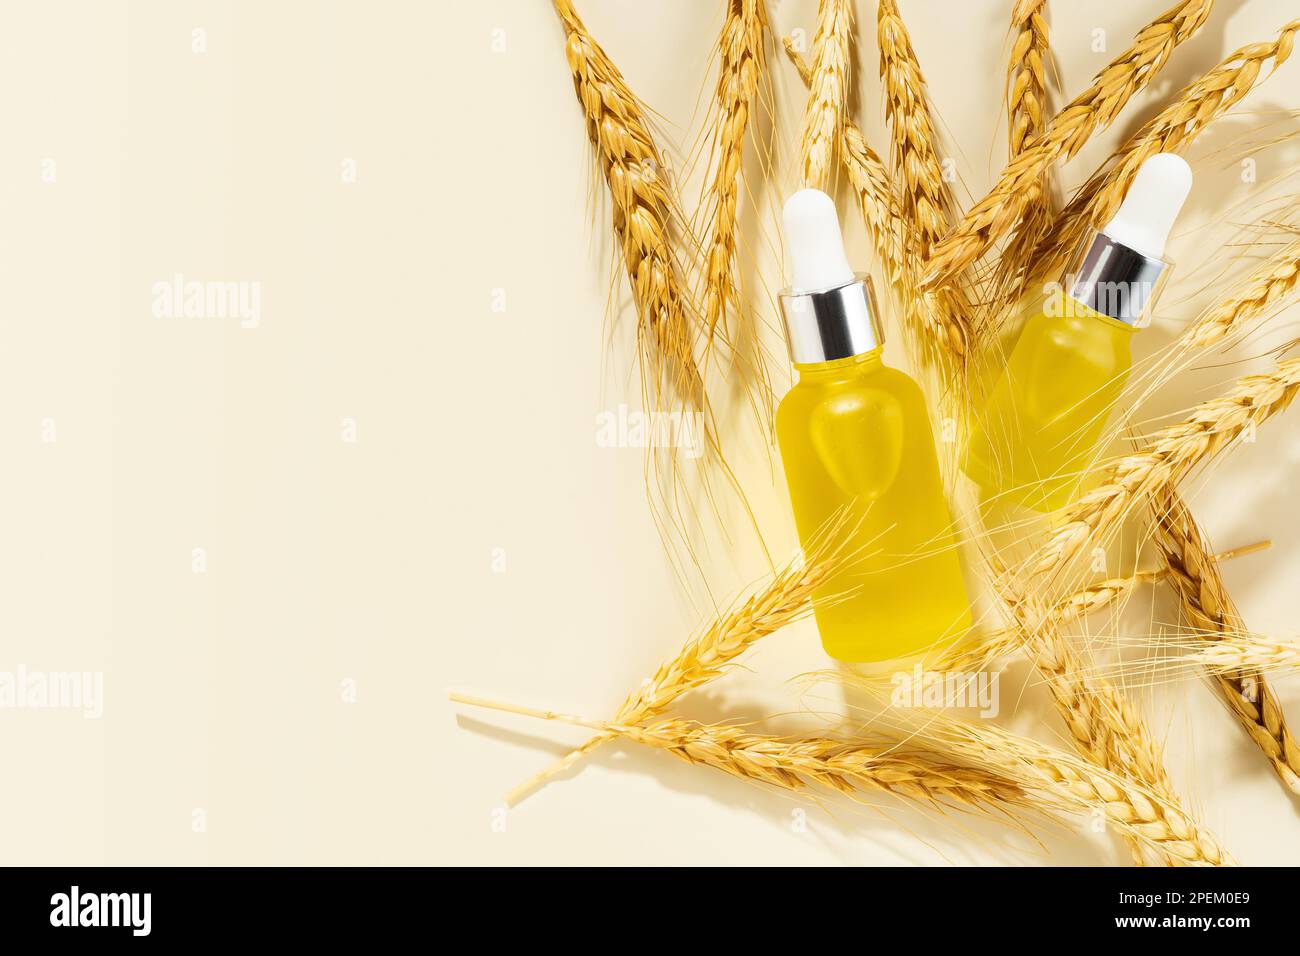 A conceptual composition of wheat essential oils and wheat sprouts on a beige background. Oil with serum for skin and hair care. Bottle of body oil Stock Photo